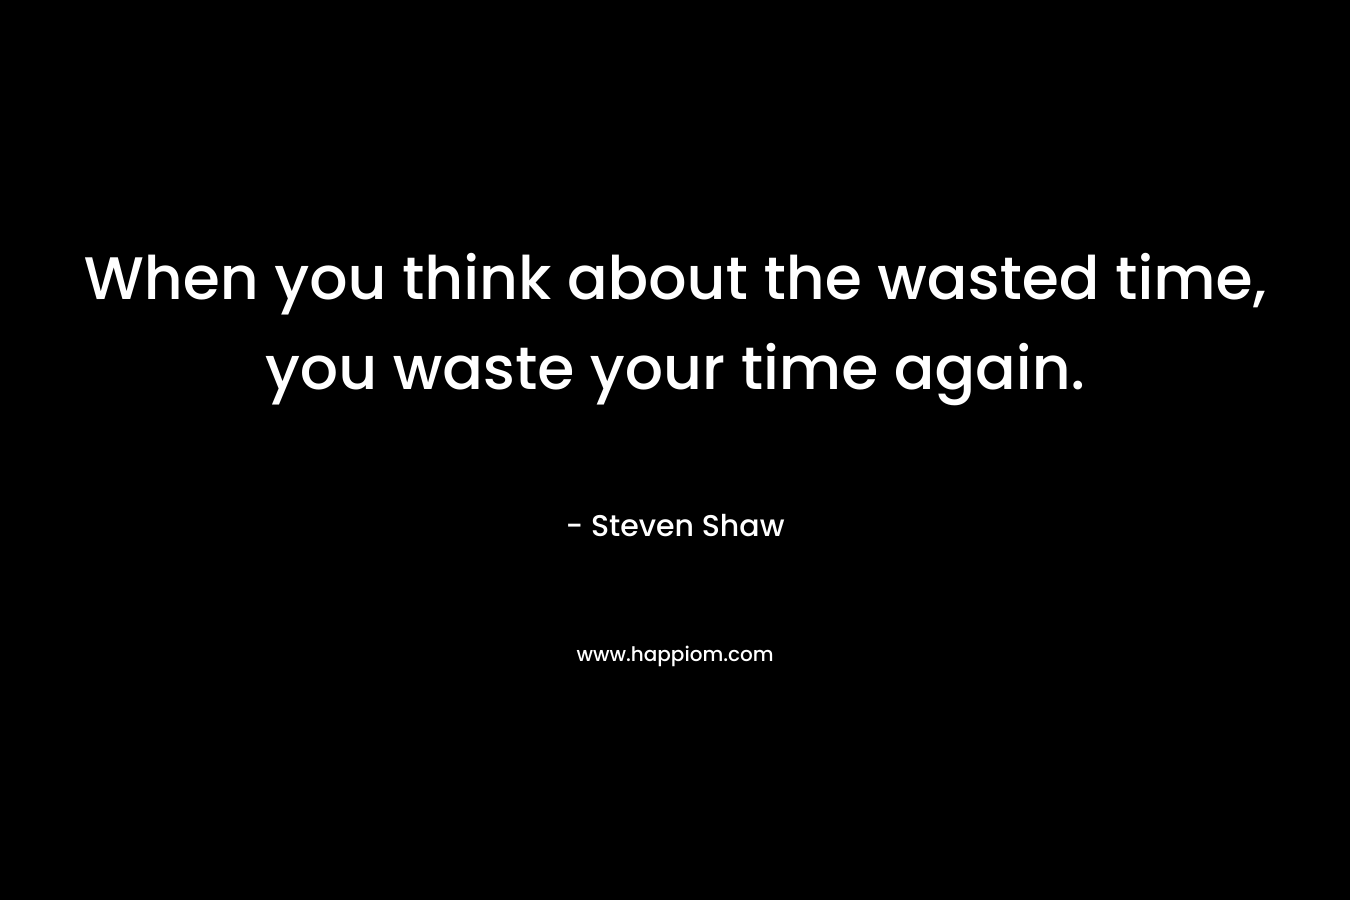 When you think about the wasted time, you waste your time again.